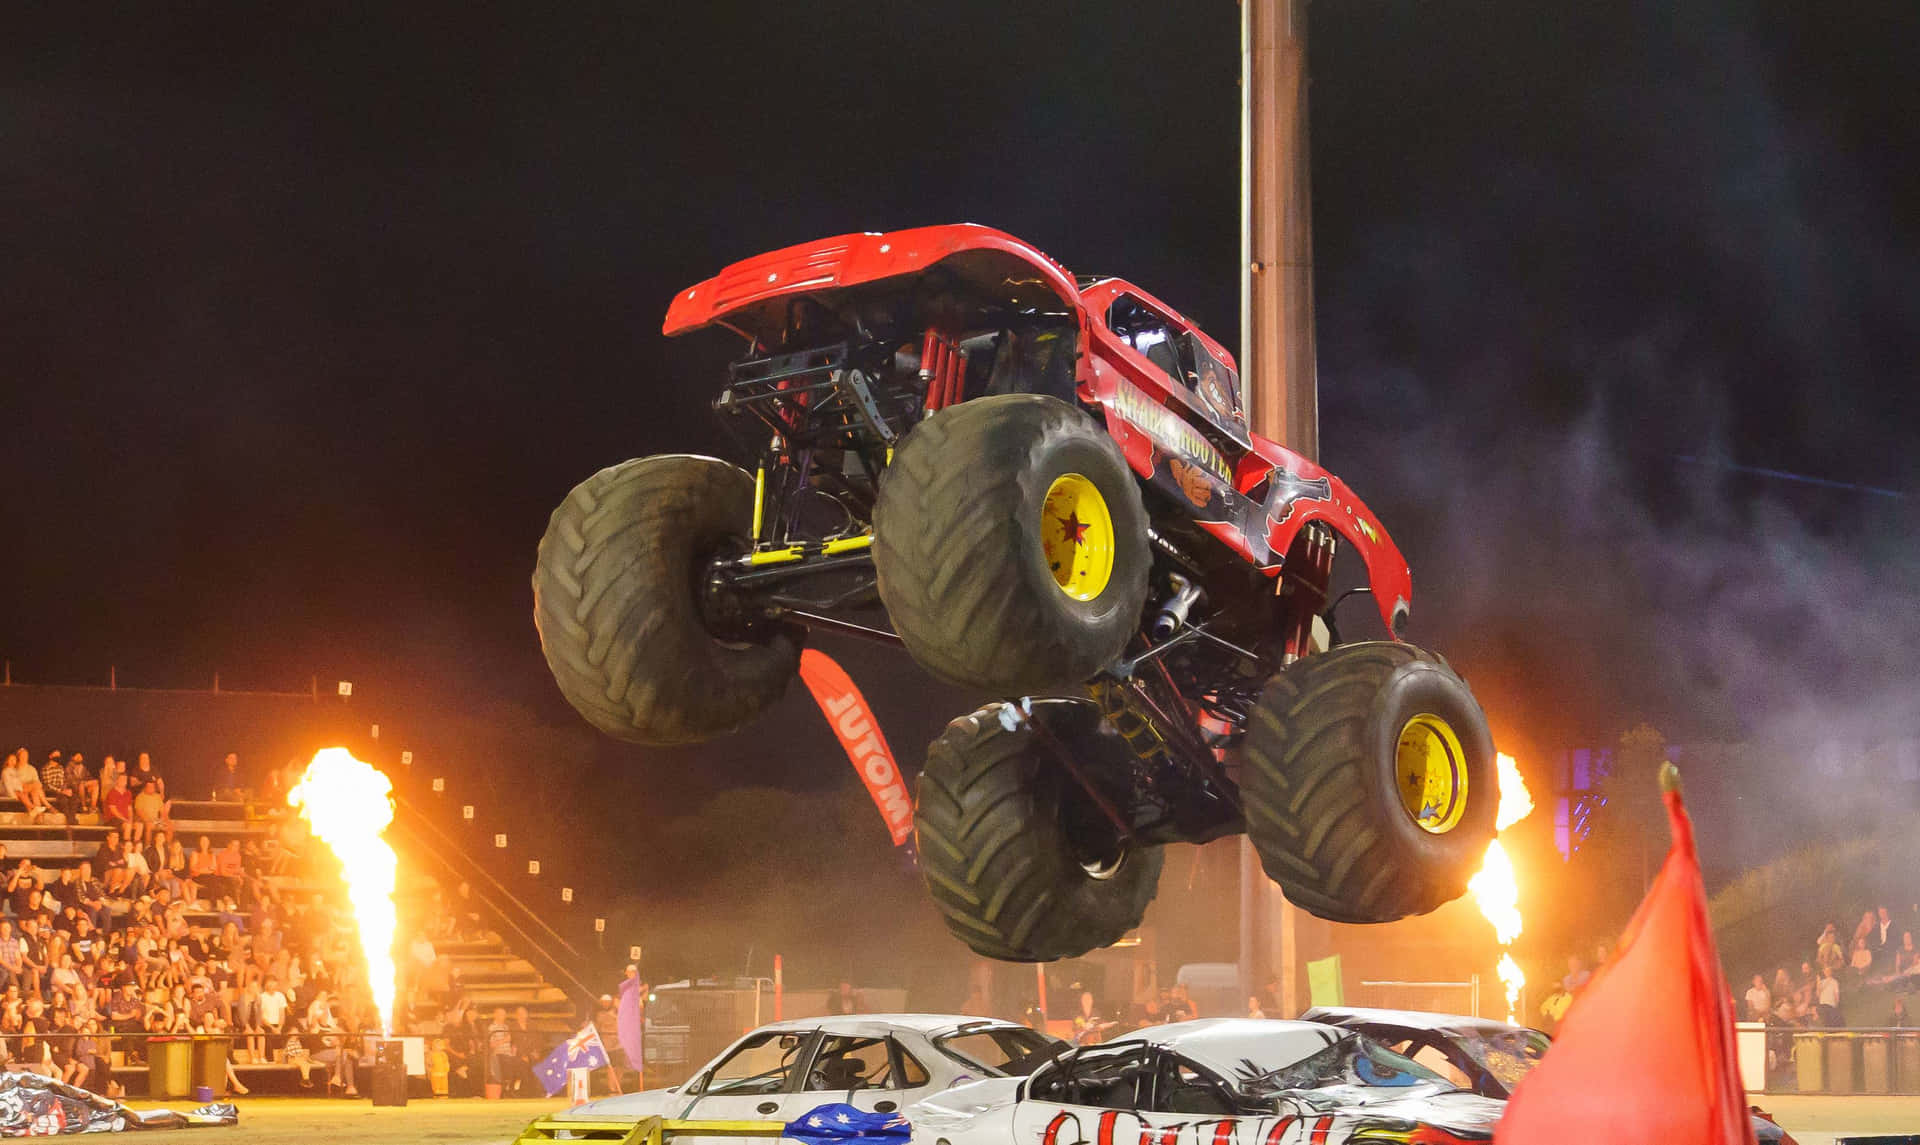 Red Monster Truck Flames Picture